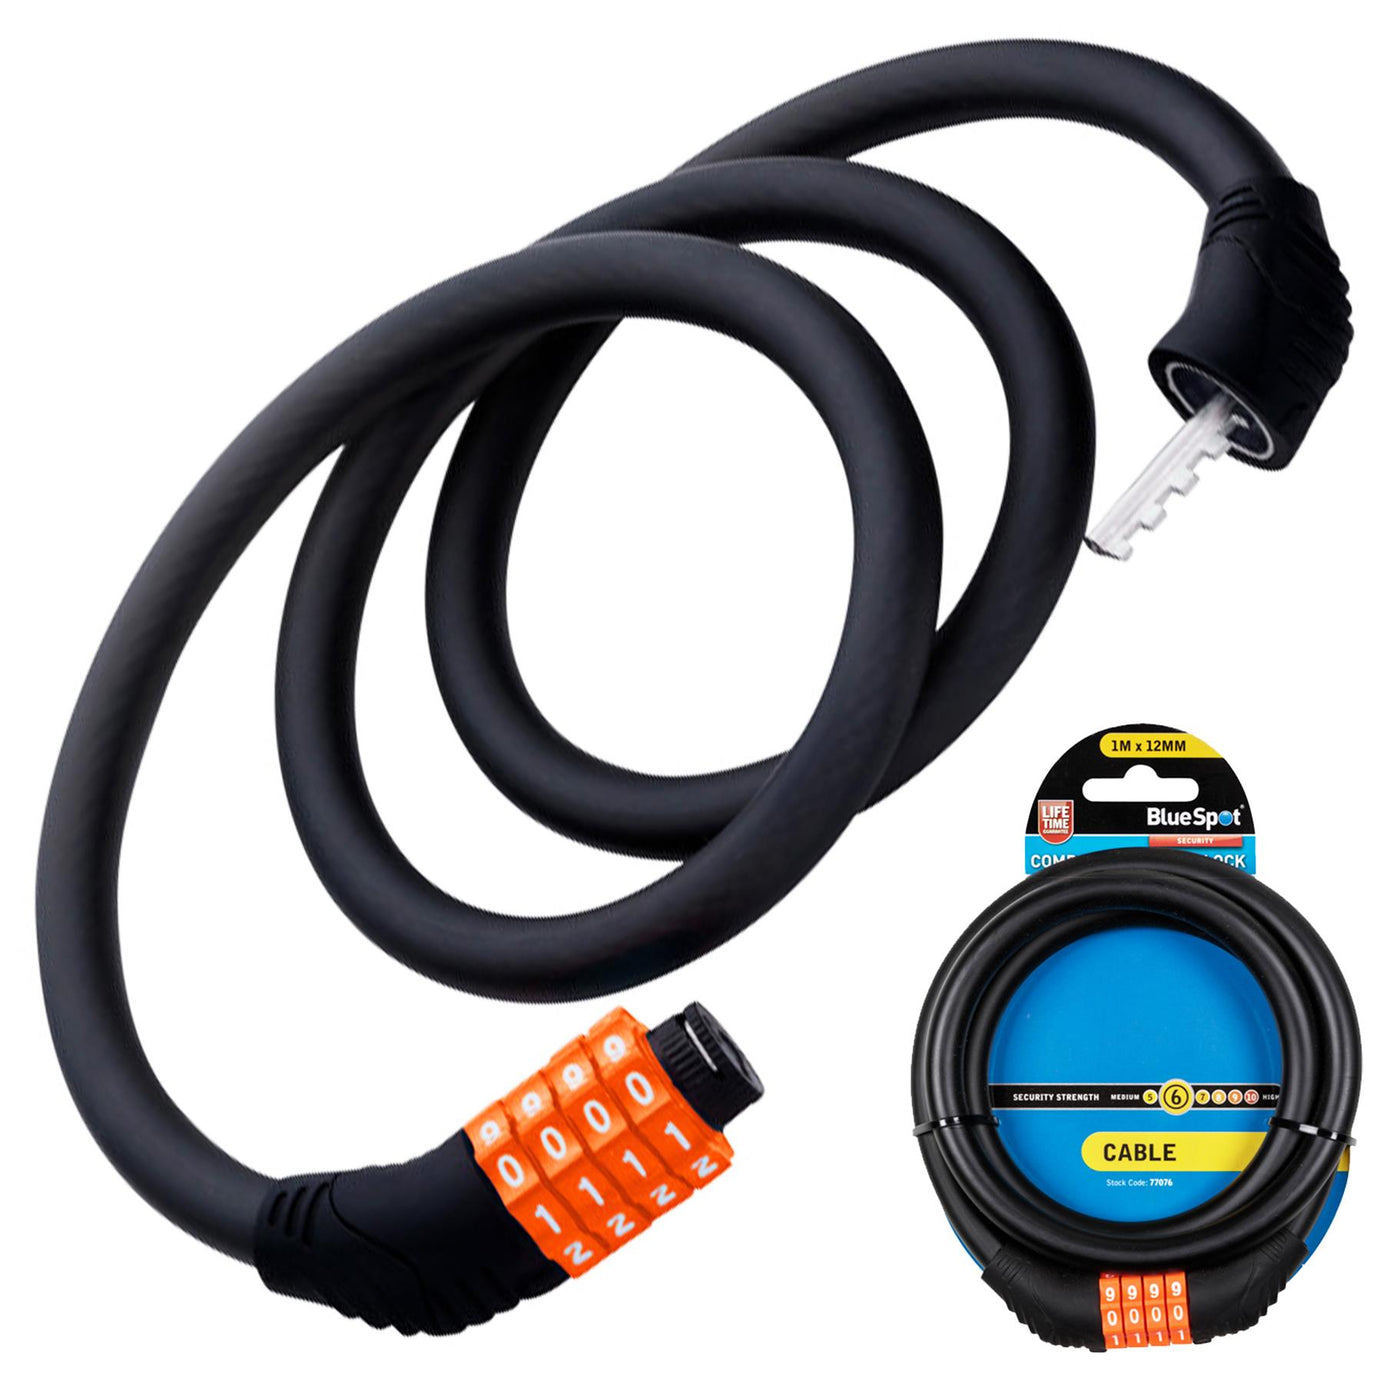 BlueSpot 4 Digit Combination Steel Cable Lock Bicycle 1m x 12mm